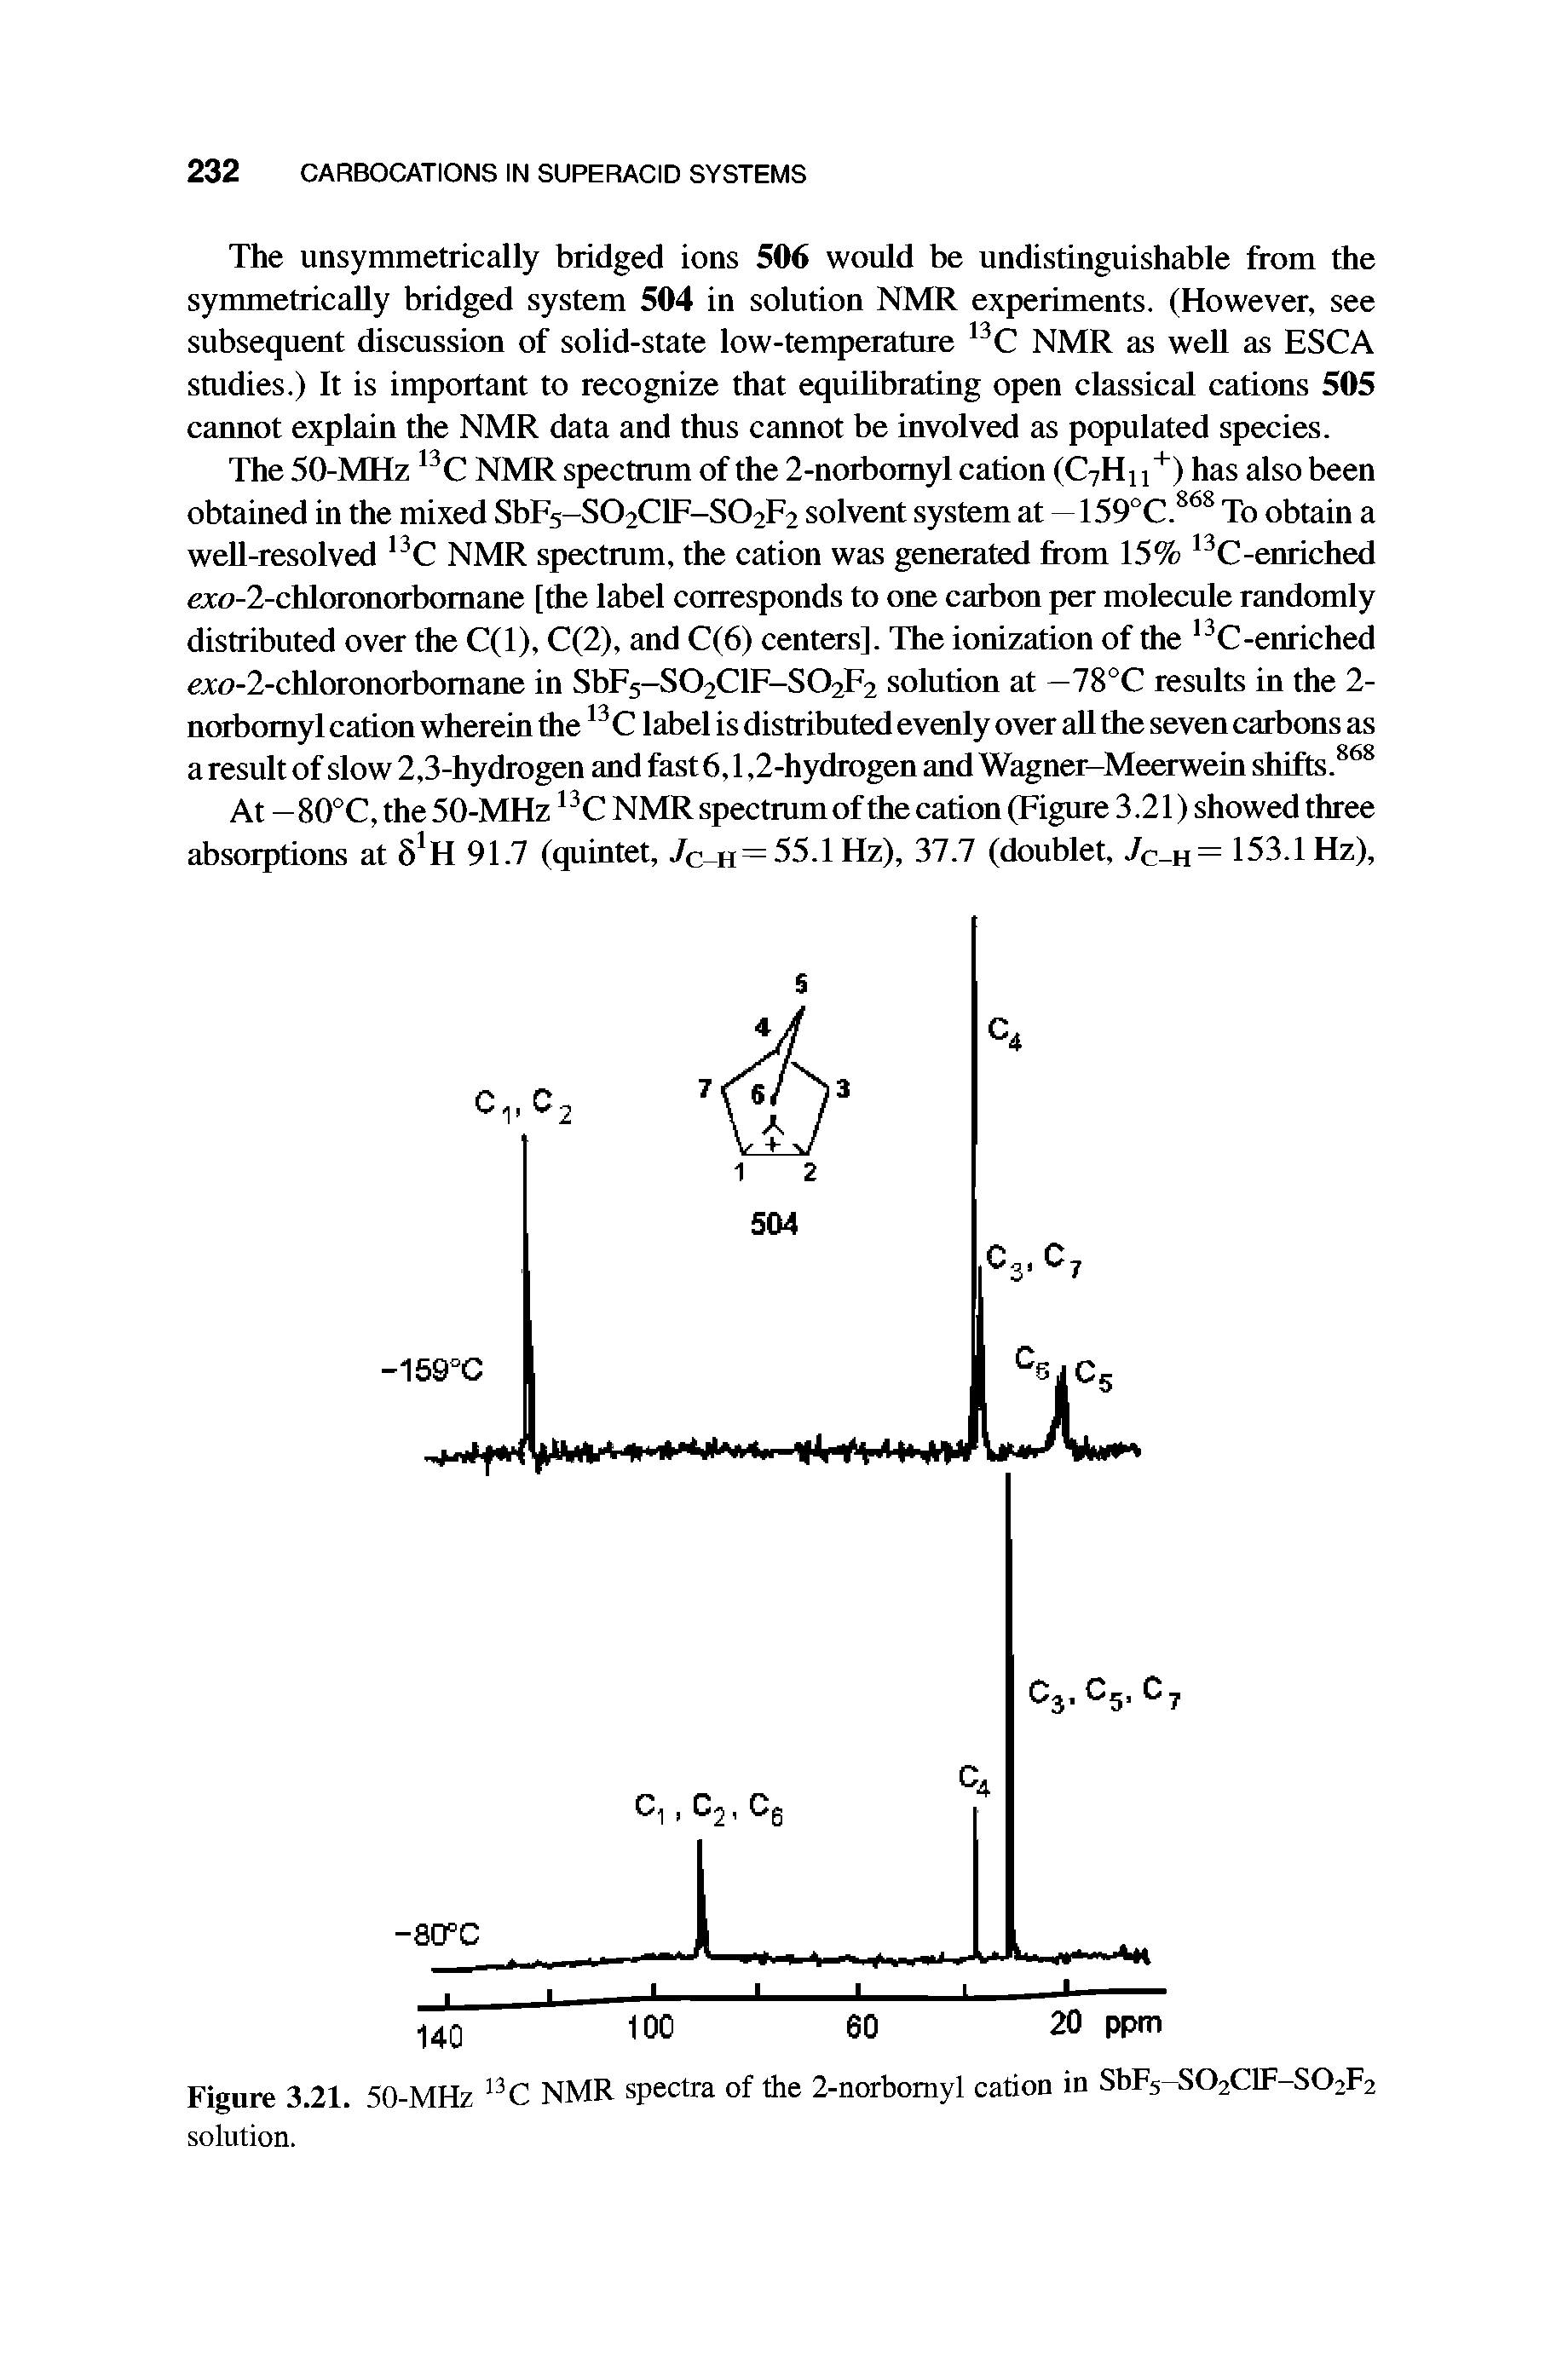 Figure 3.21. 50-MHz 13 C NMR spectra of the 2-norbomyl cation in SbF5-S02ClF-S02F2 solution.